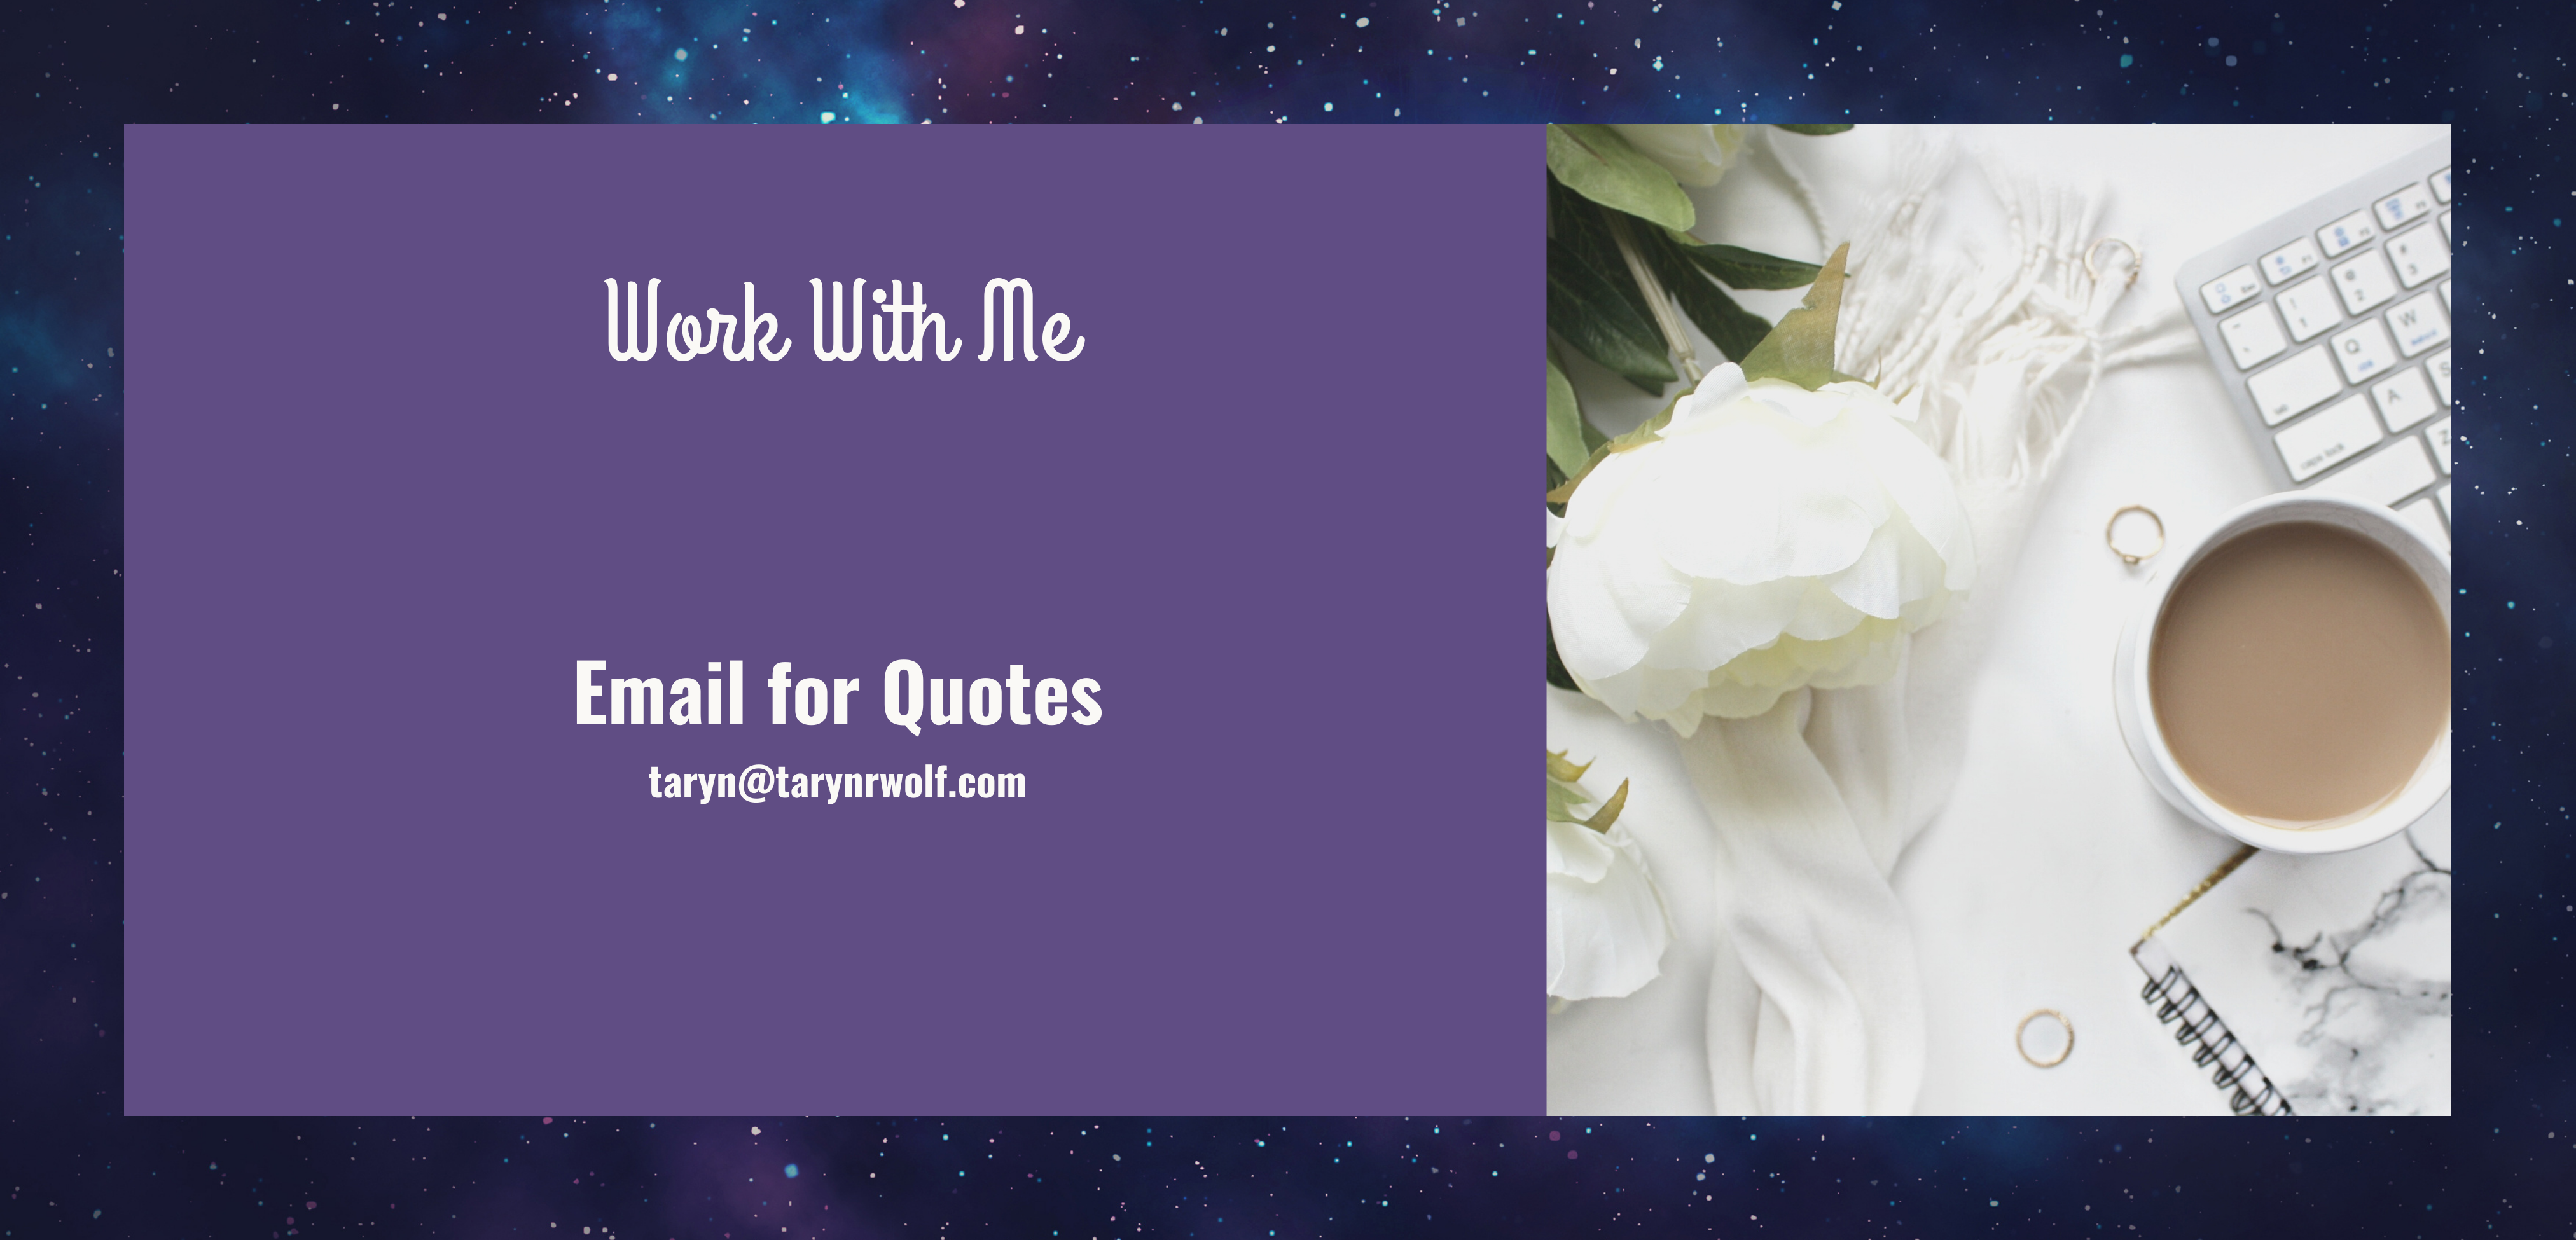 Work with me. Email for quotes. taryn@tarynrwolf.com